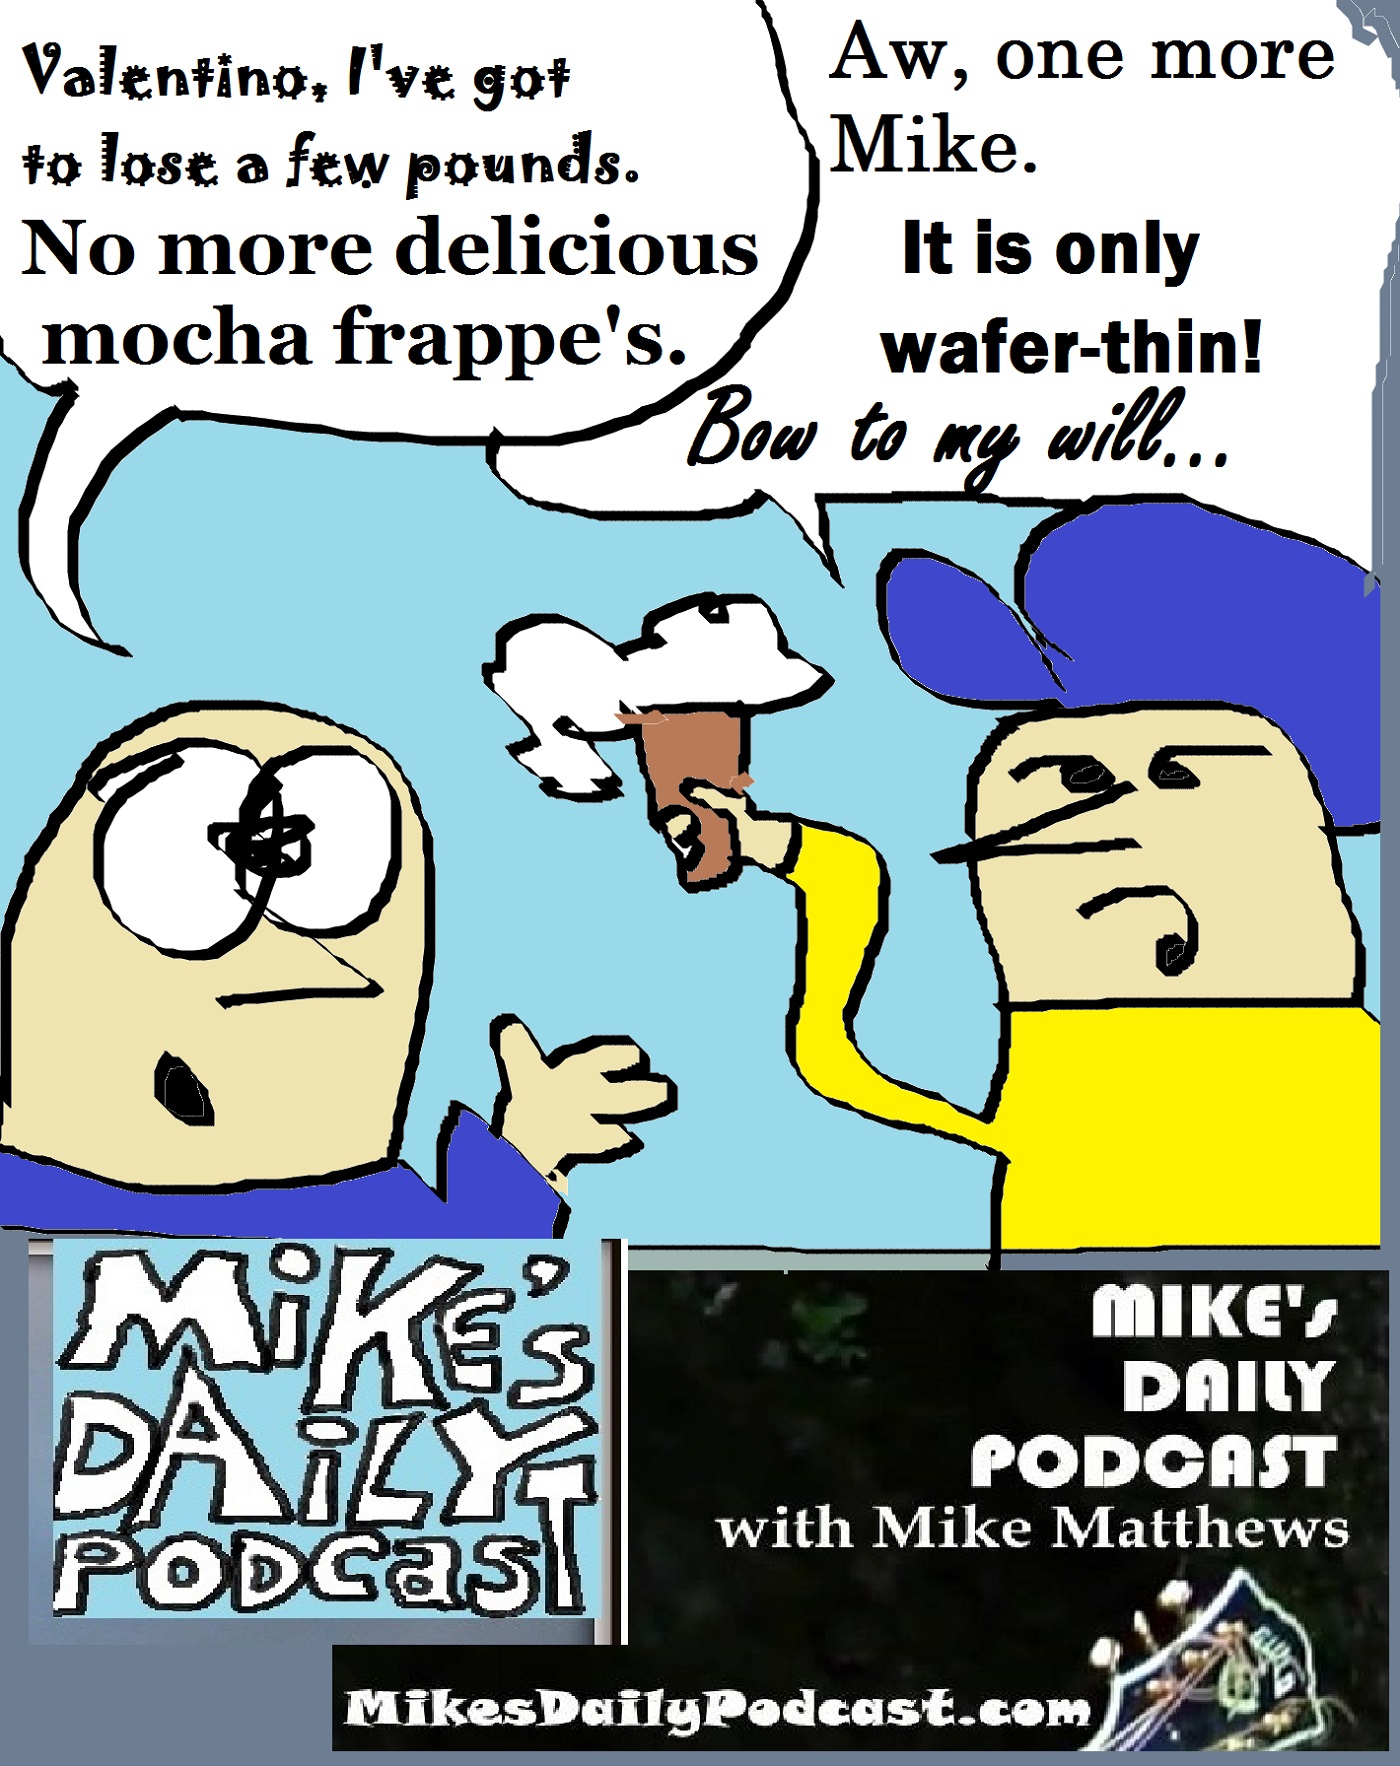 mikes-daily-podcast-1220-mocha-frappe